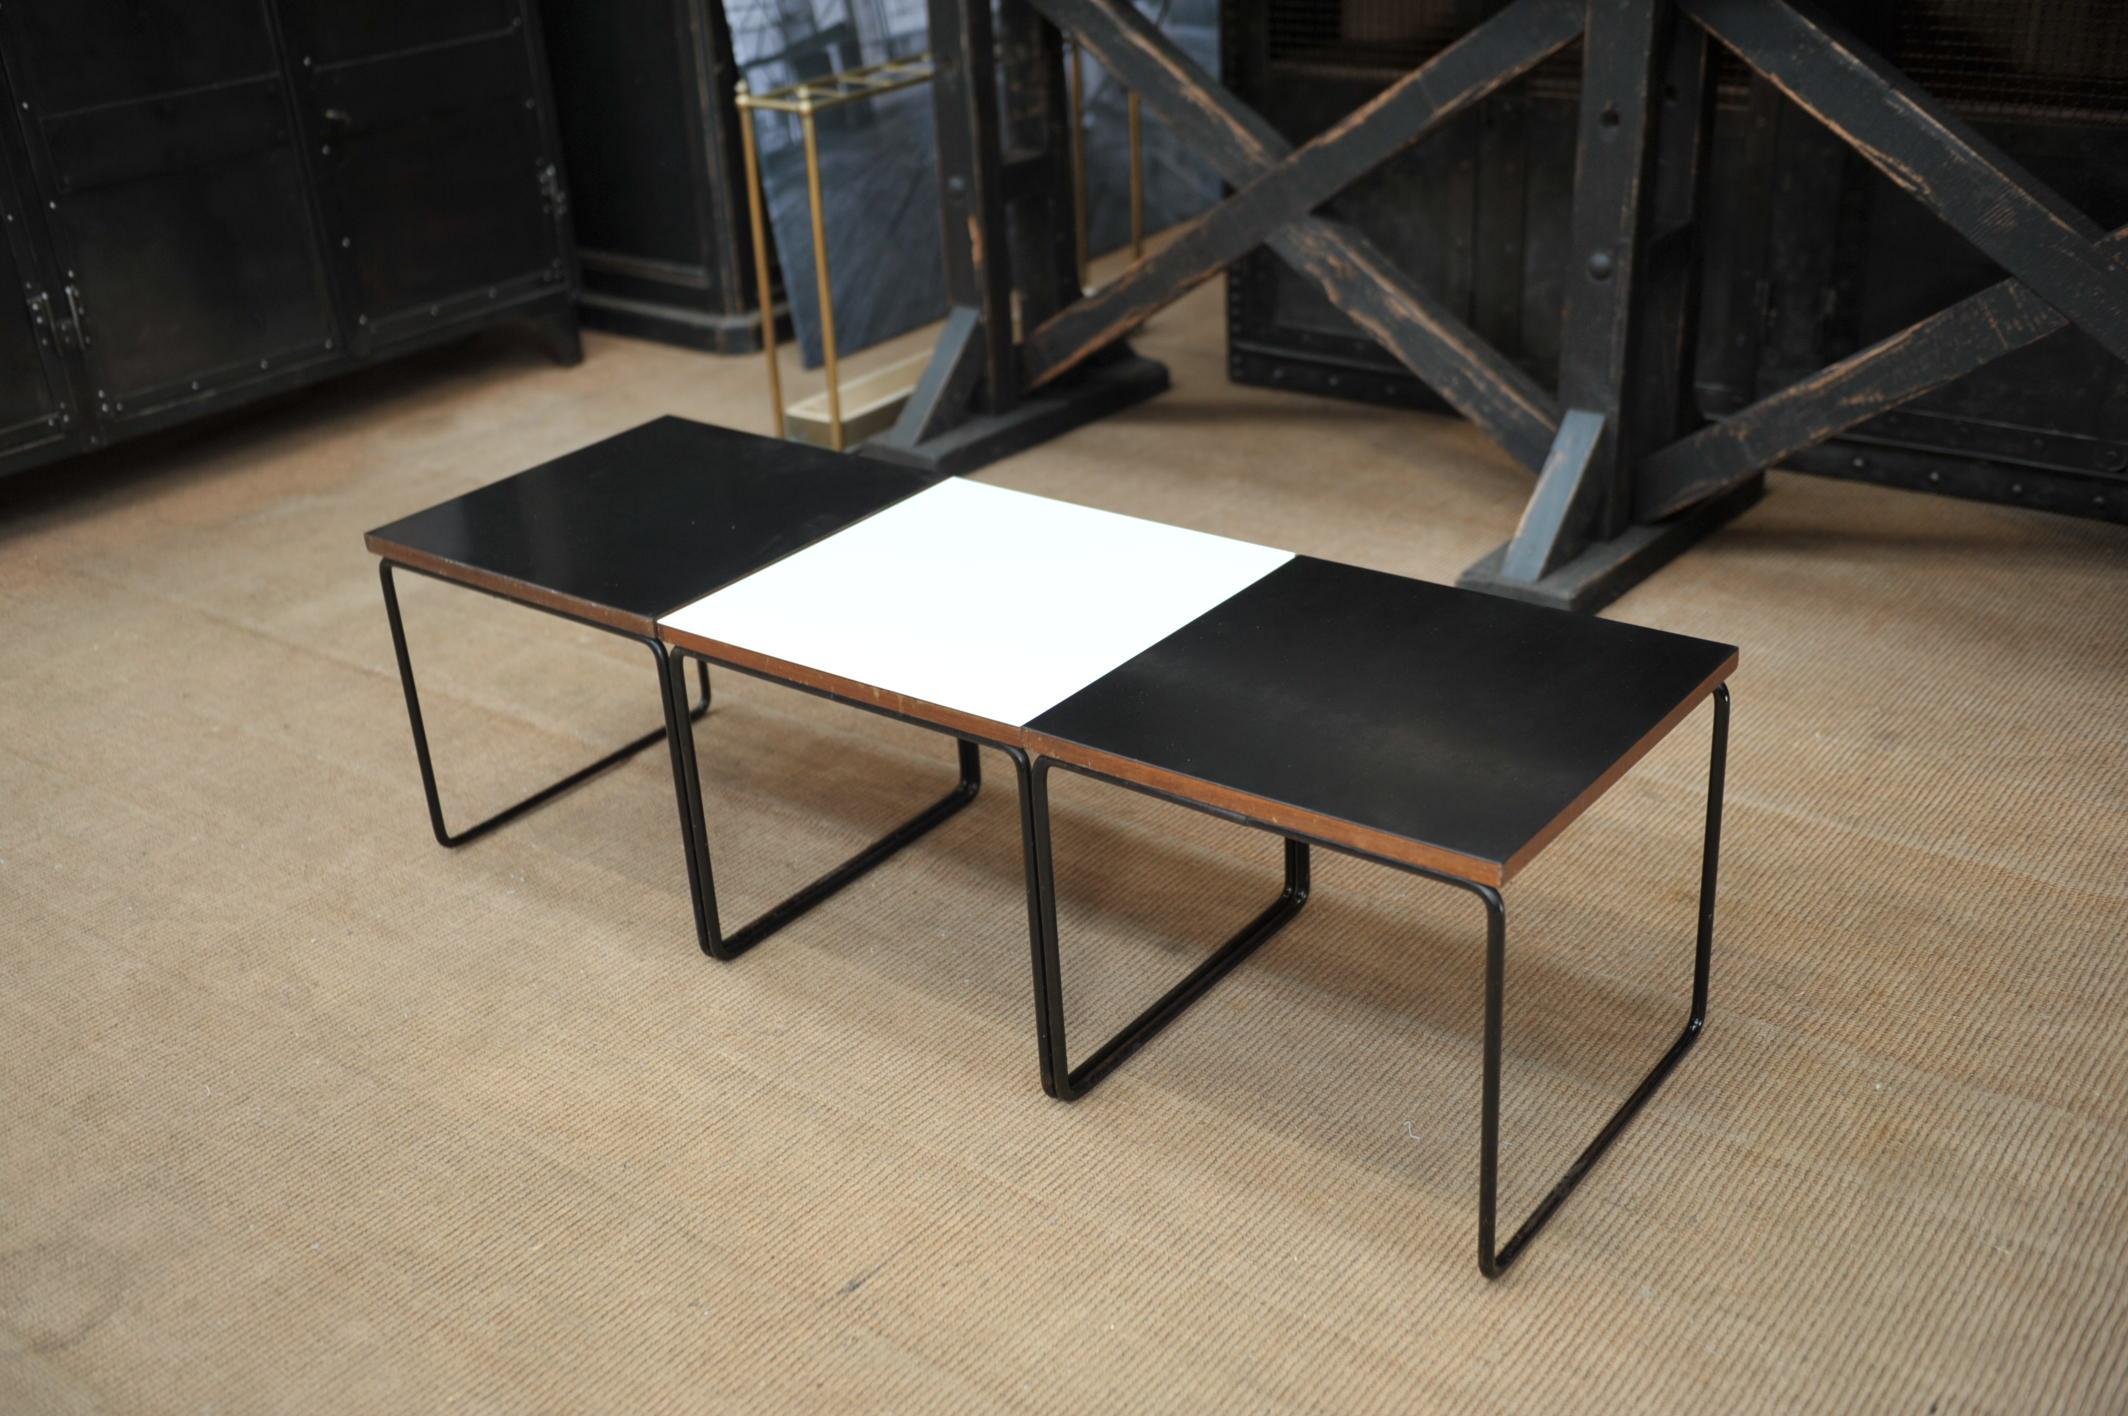 Set of 3 coffee table by French Designer Pierre Guariche for Manufacturer Steiner France circa 1950 Iron base and exotic wood top covered with black and white célamine .Stamped Steiner and each tables.